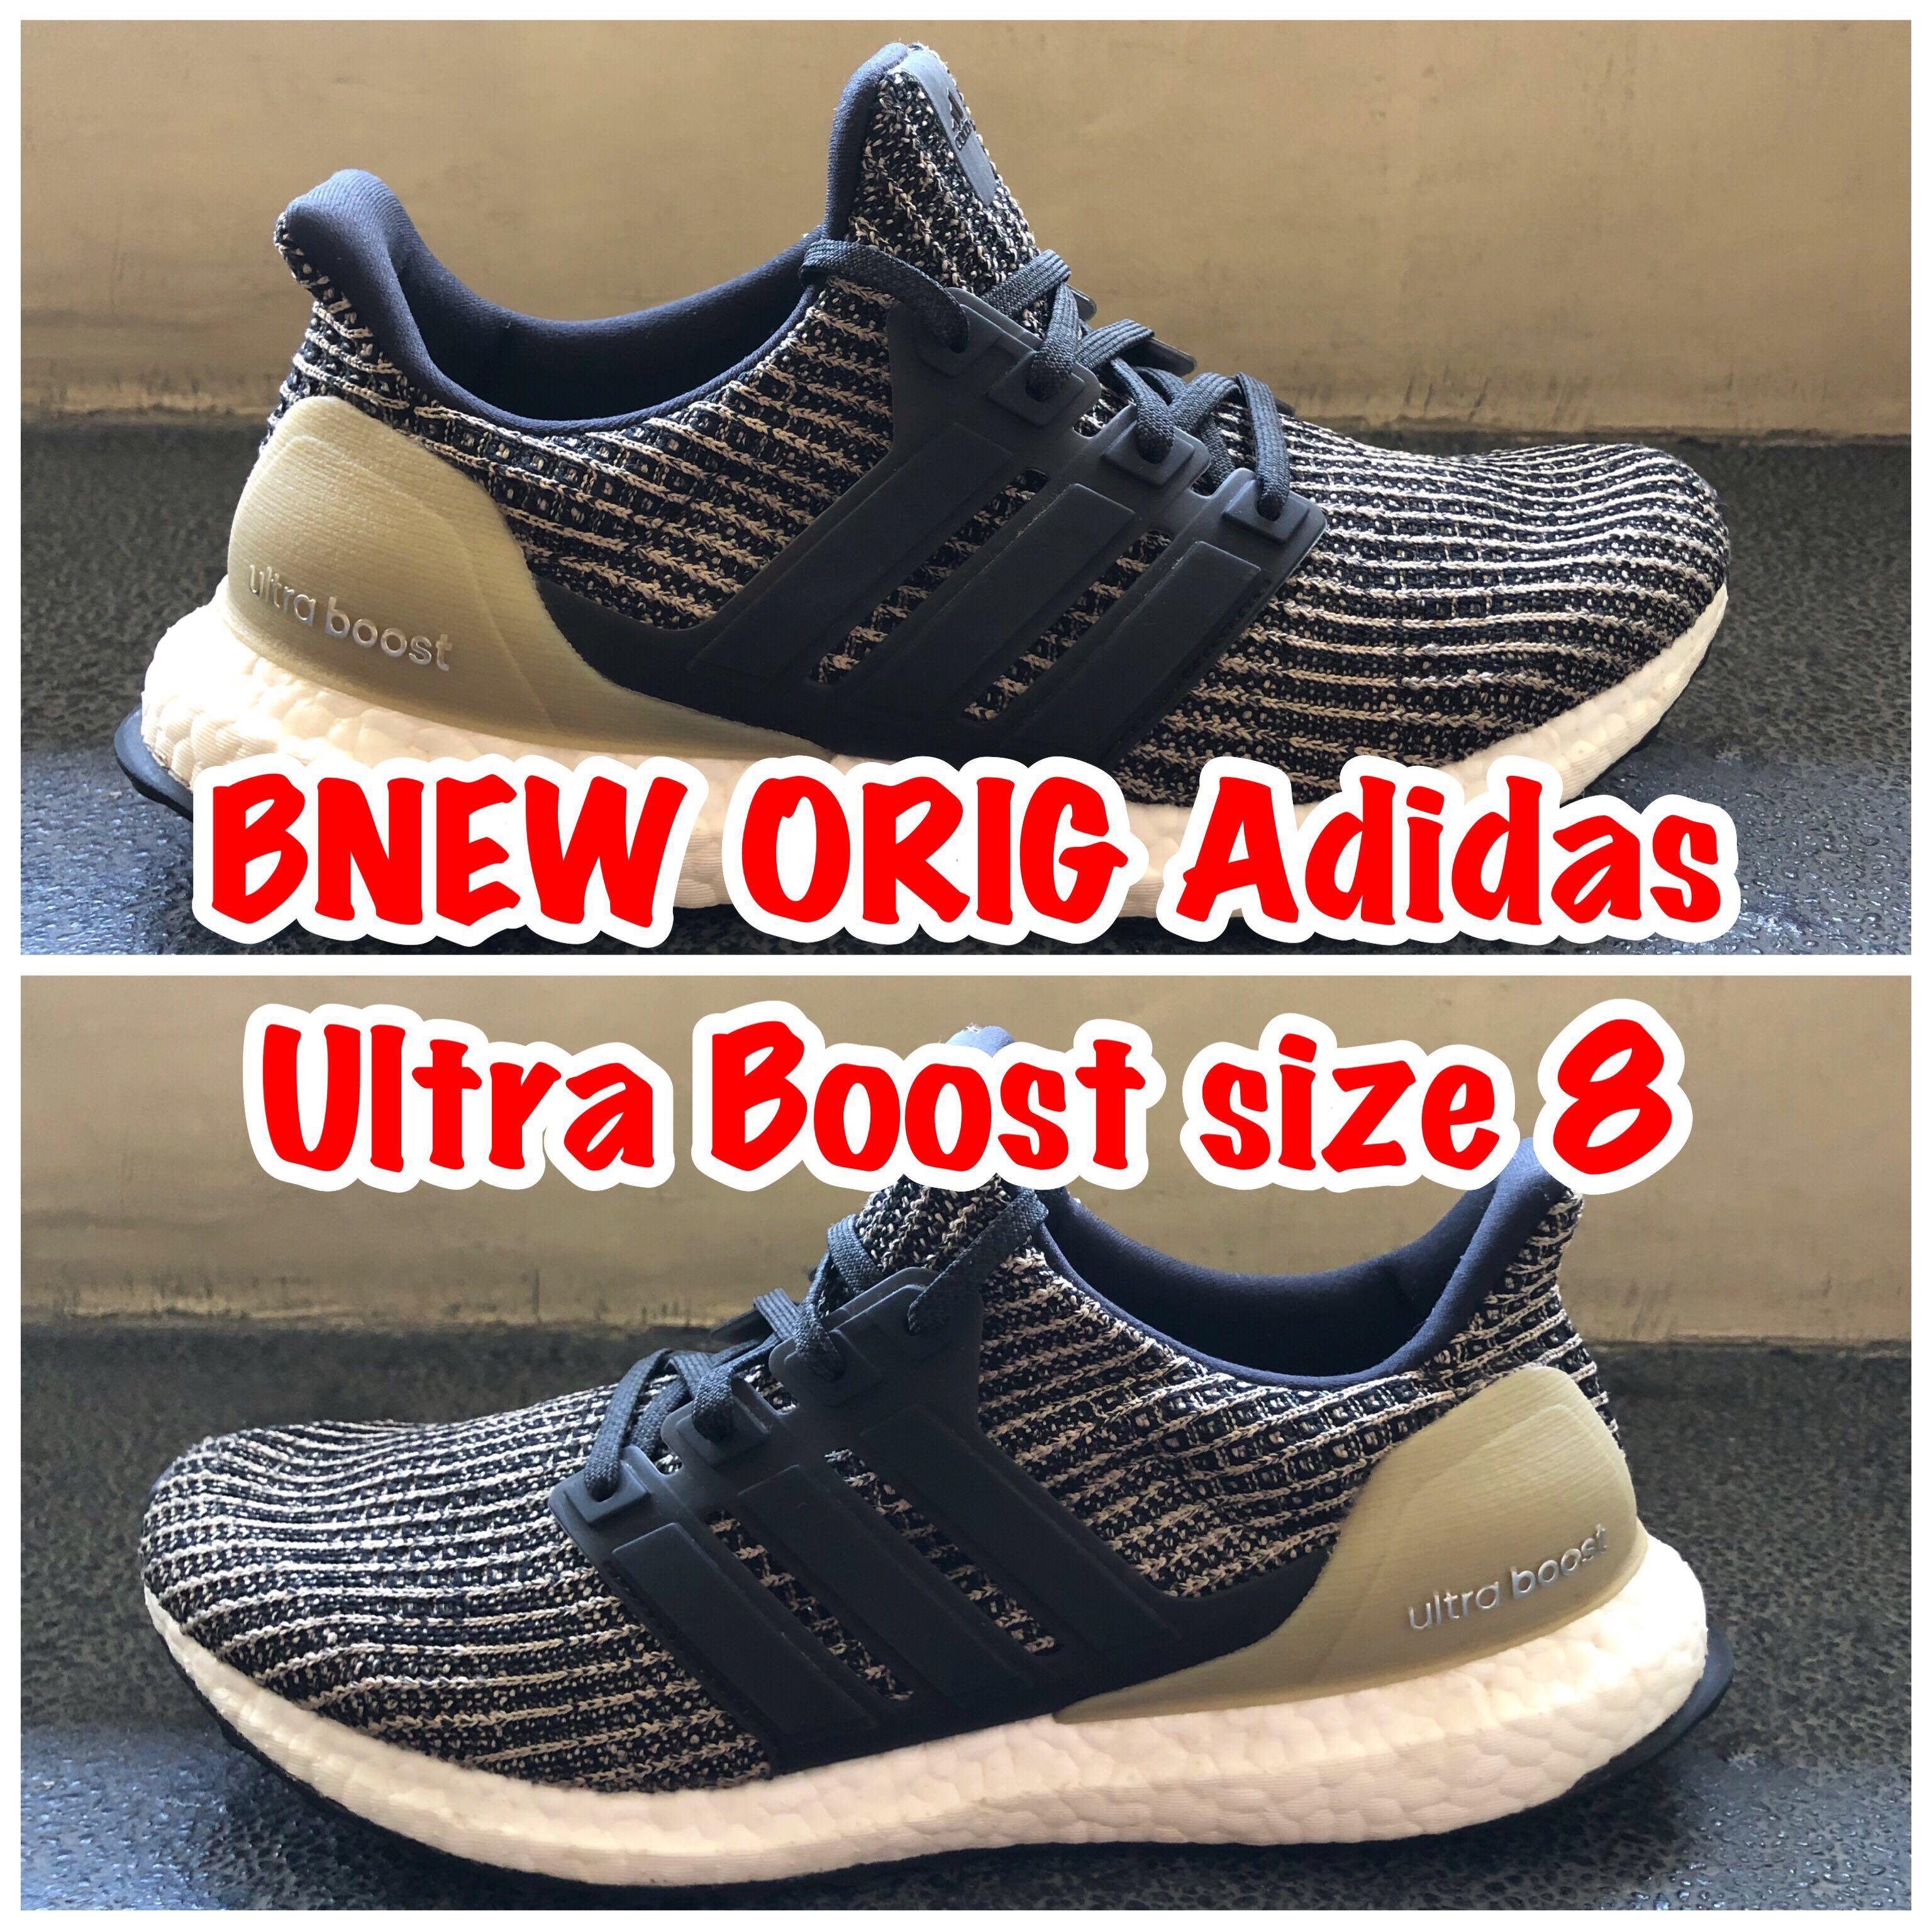 adidas ultra boost mens size 1.5